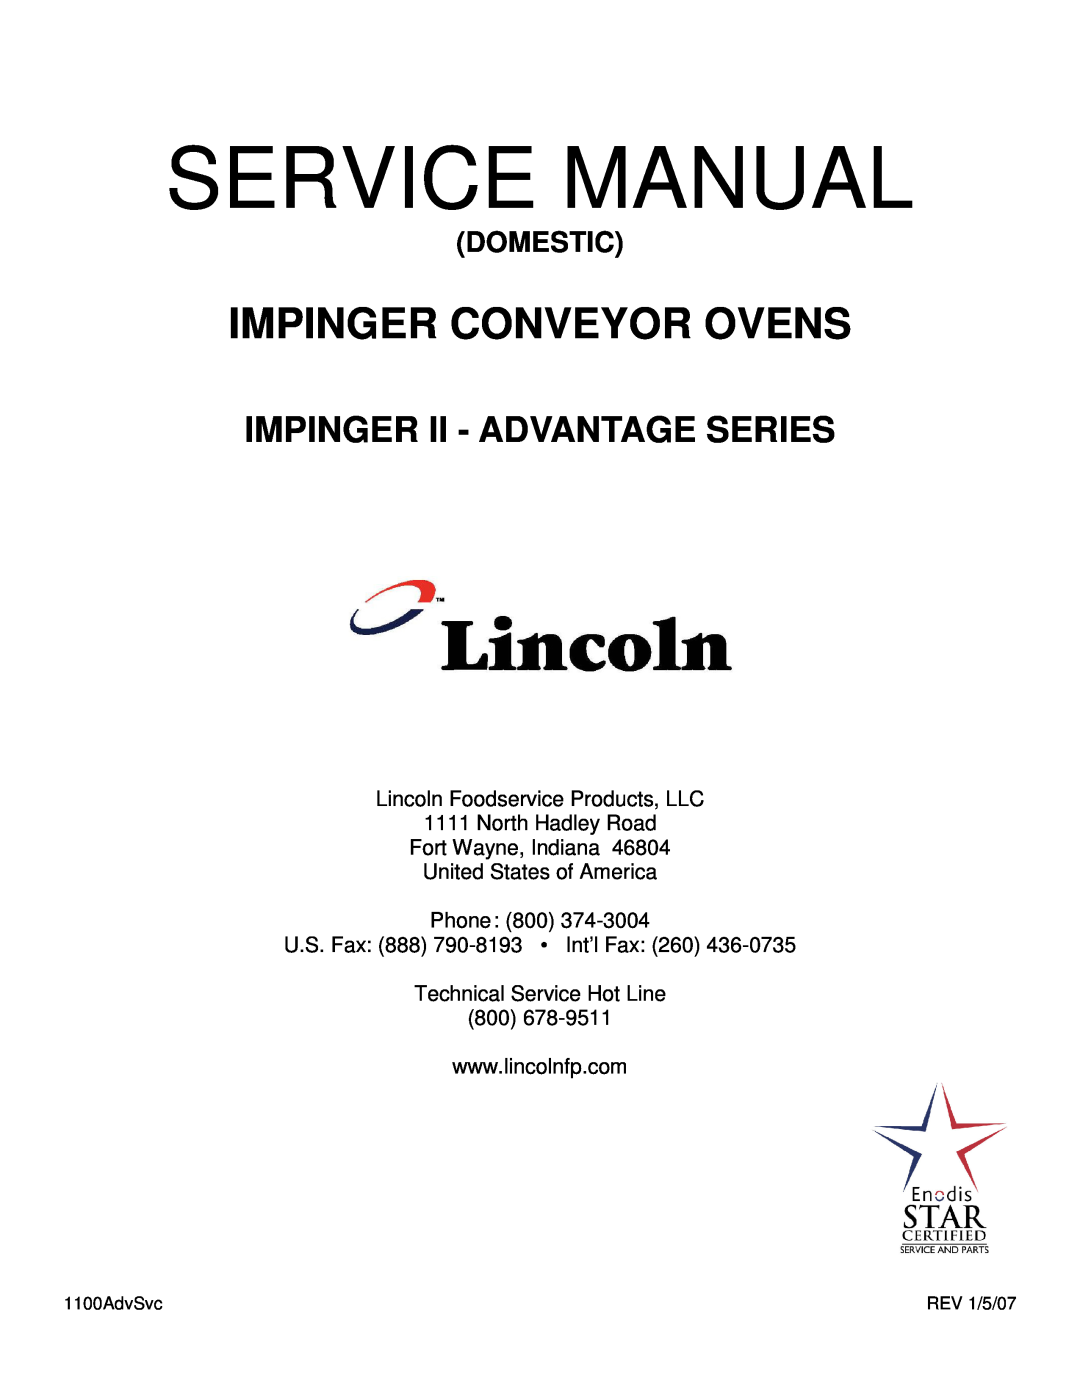 Lincoln 116-000-A service manual Lincoln Foodservice Products, LLC, North Hadley Road Fort Wayne, Indiana, Domestic 